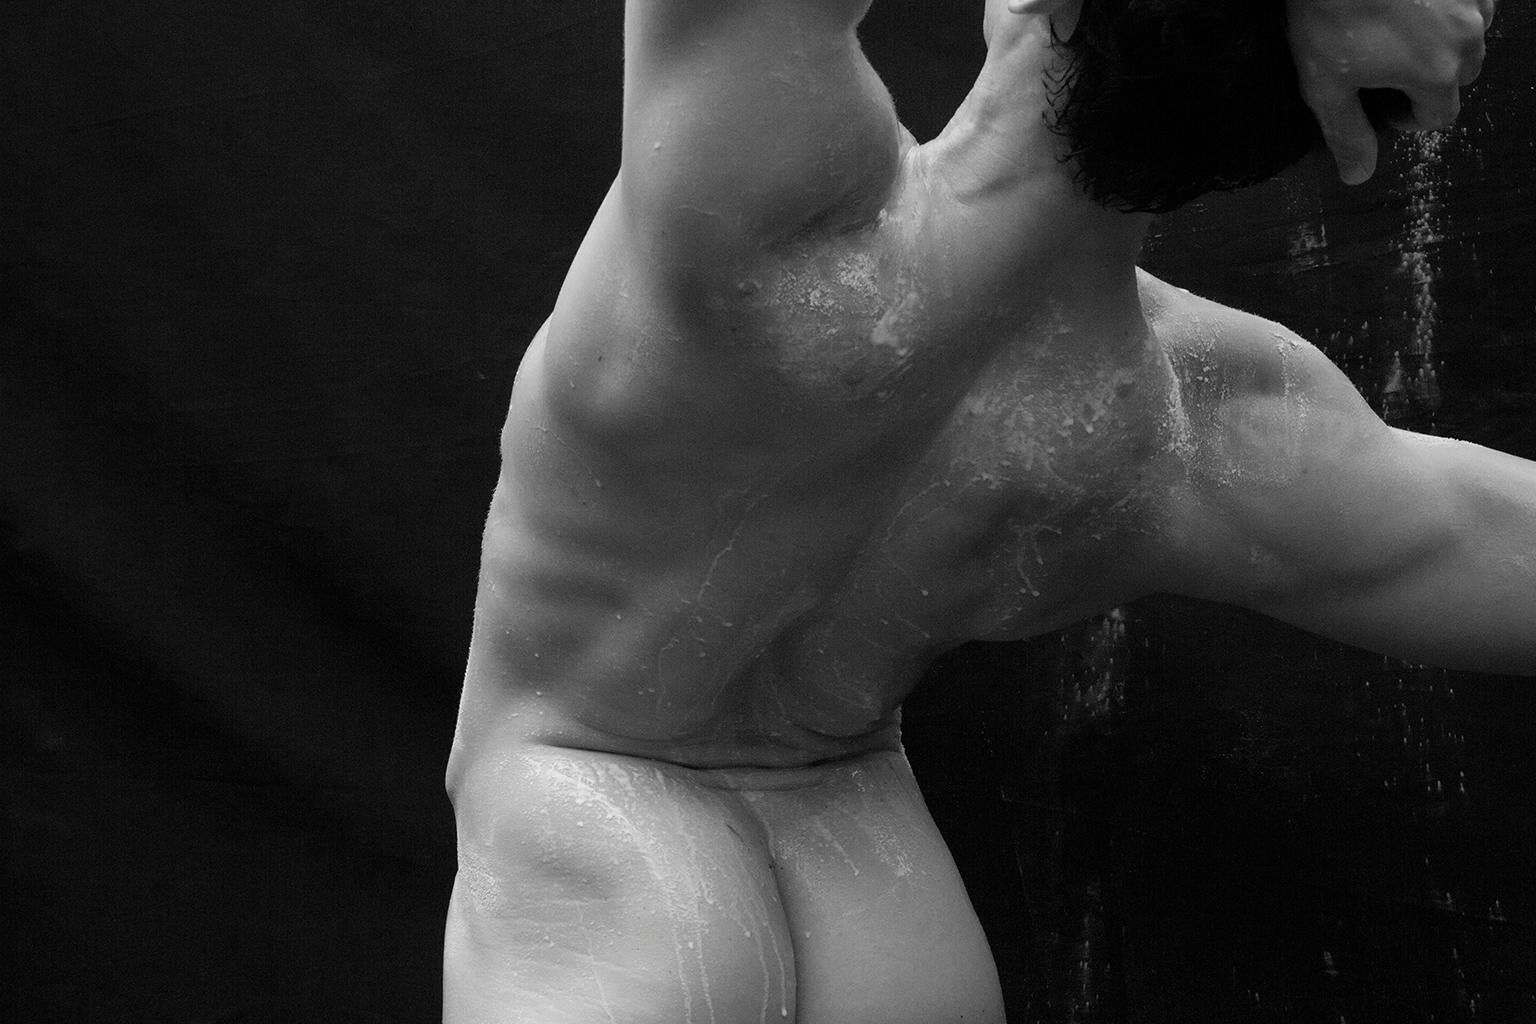 Ricky Cohete Nude Photograph - Arena Cuatro, From the series Acto Uno. Male Nude Limited Edition B&W Photograph